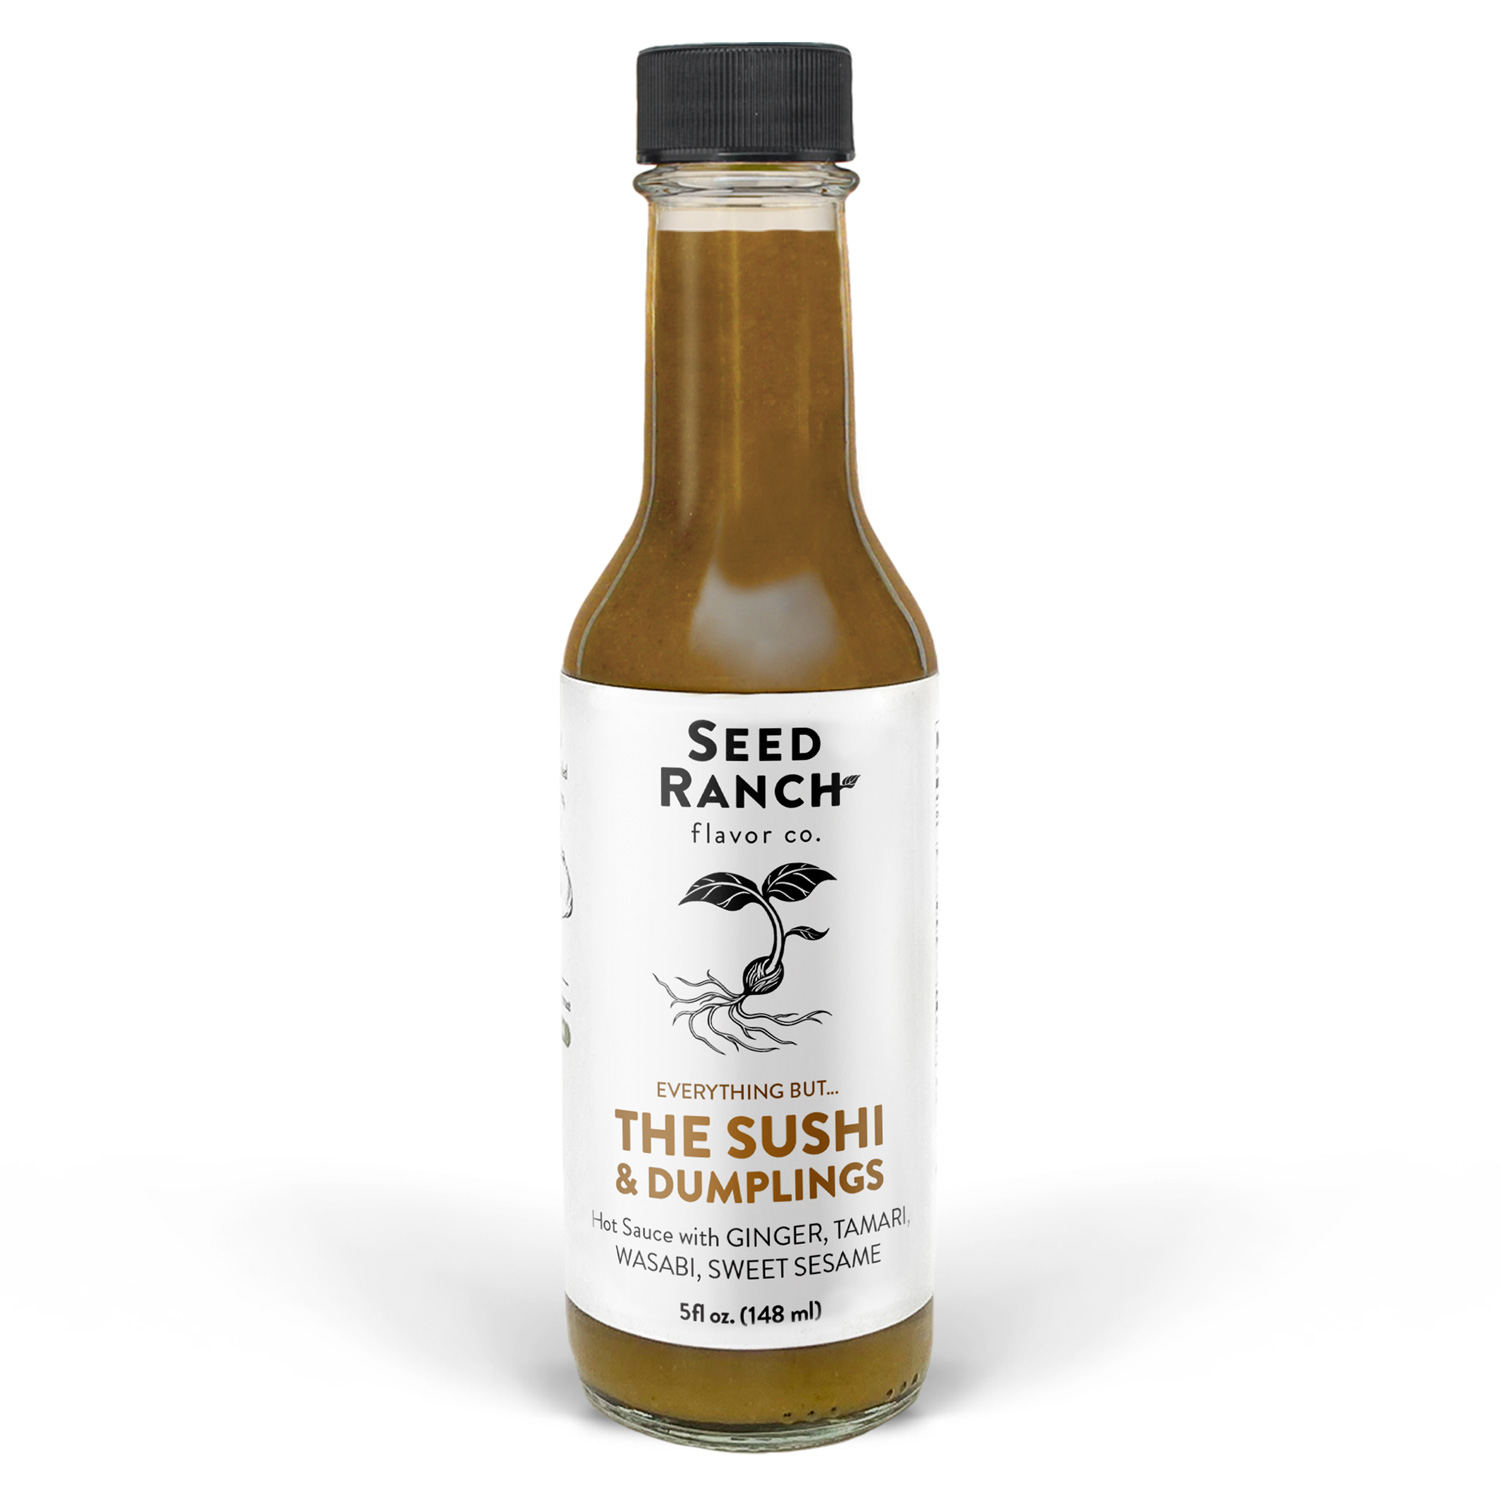 Seed Ranch Flavor Co. Everything But The Sushi & Dumplings Hot Sauce 6 units per case 5.0 oz